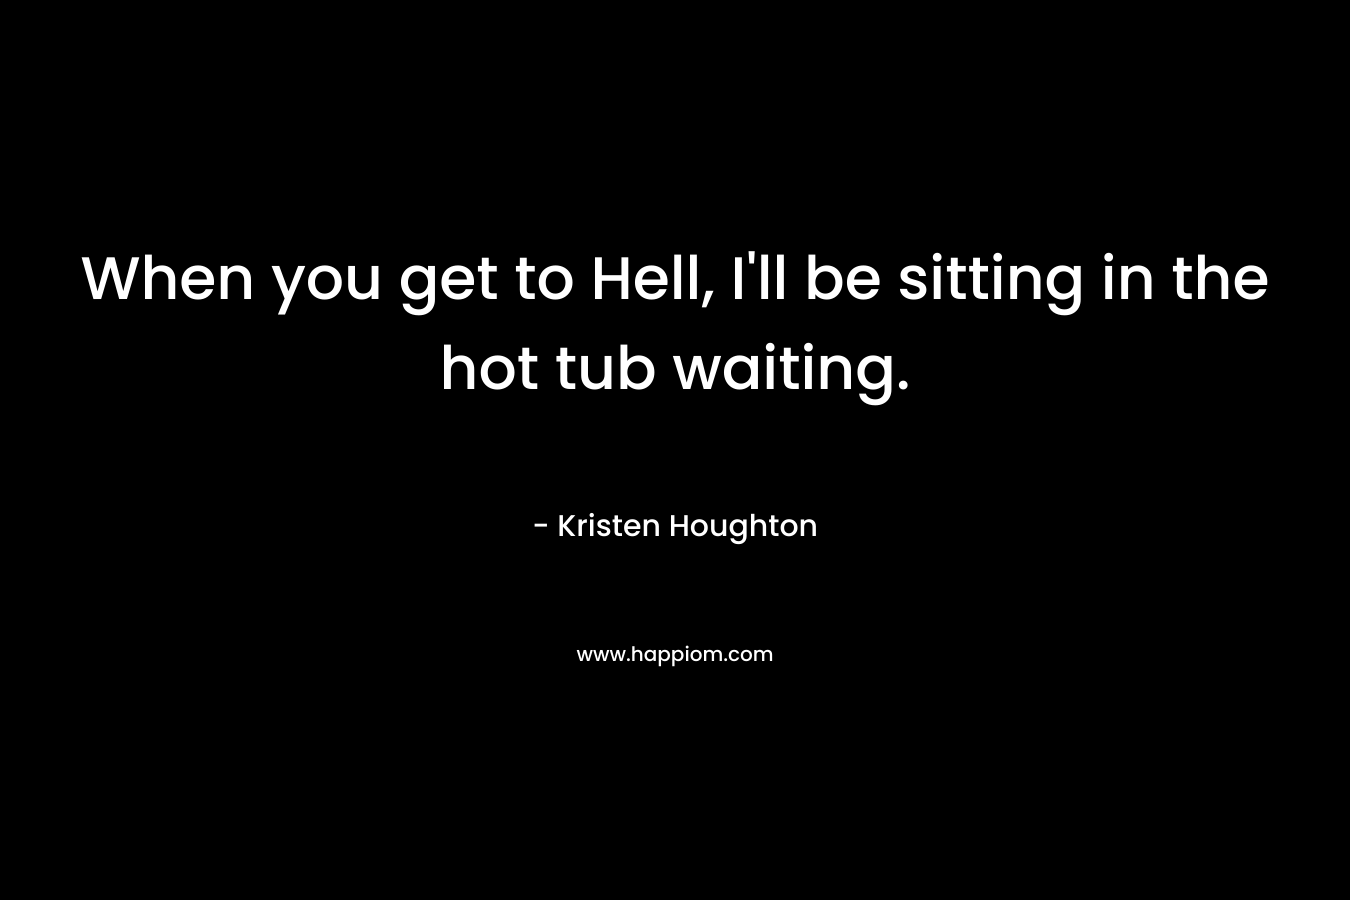 When you get to Hell, I’ll be sitting in the hot tub waiting. – Kristen Houghton